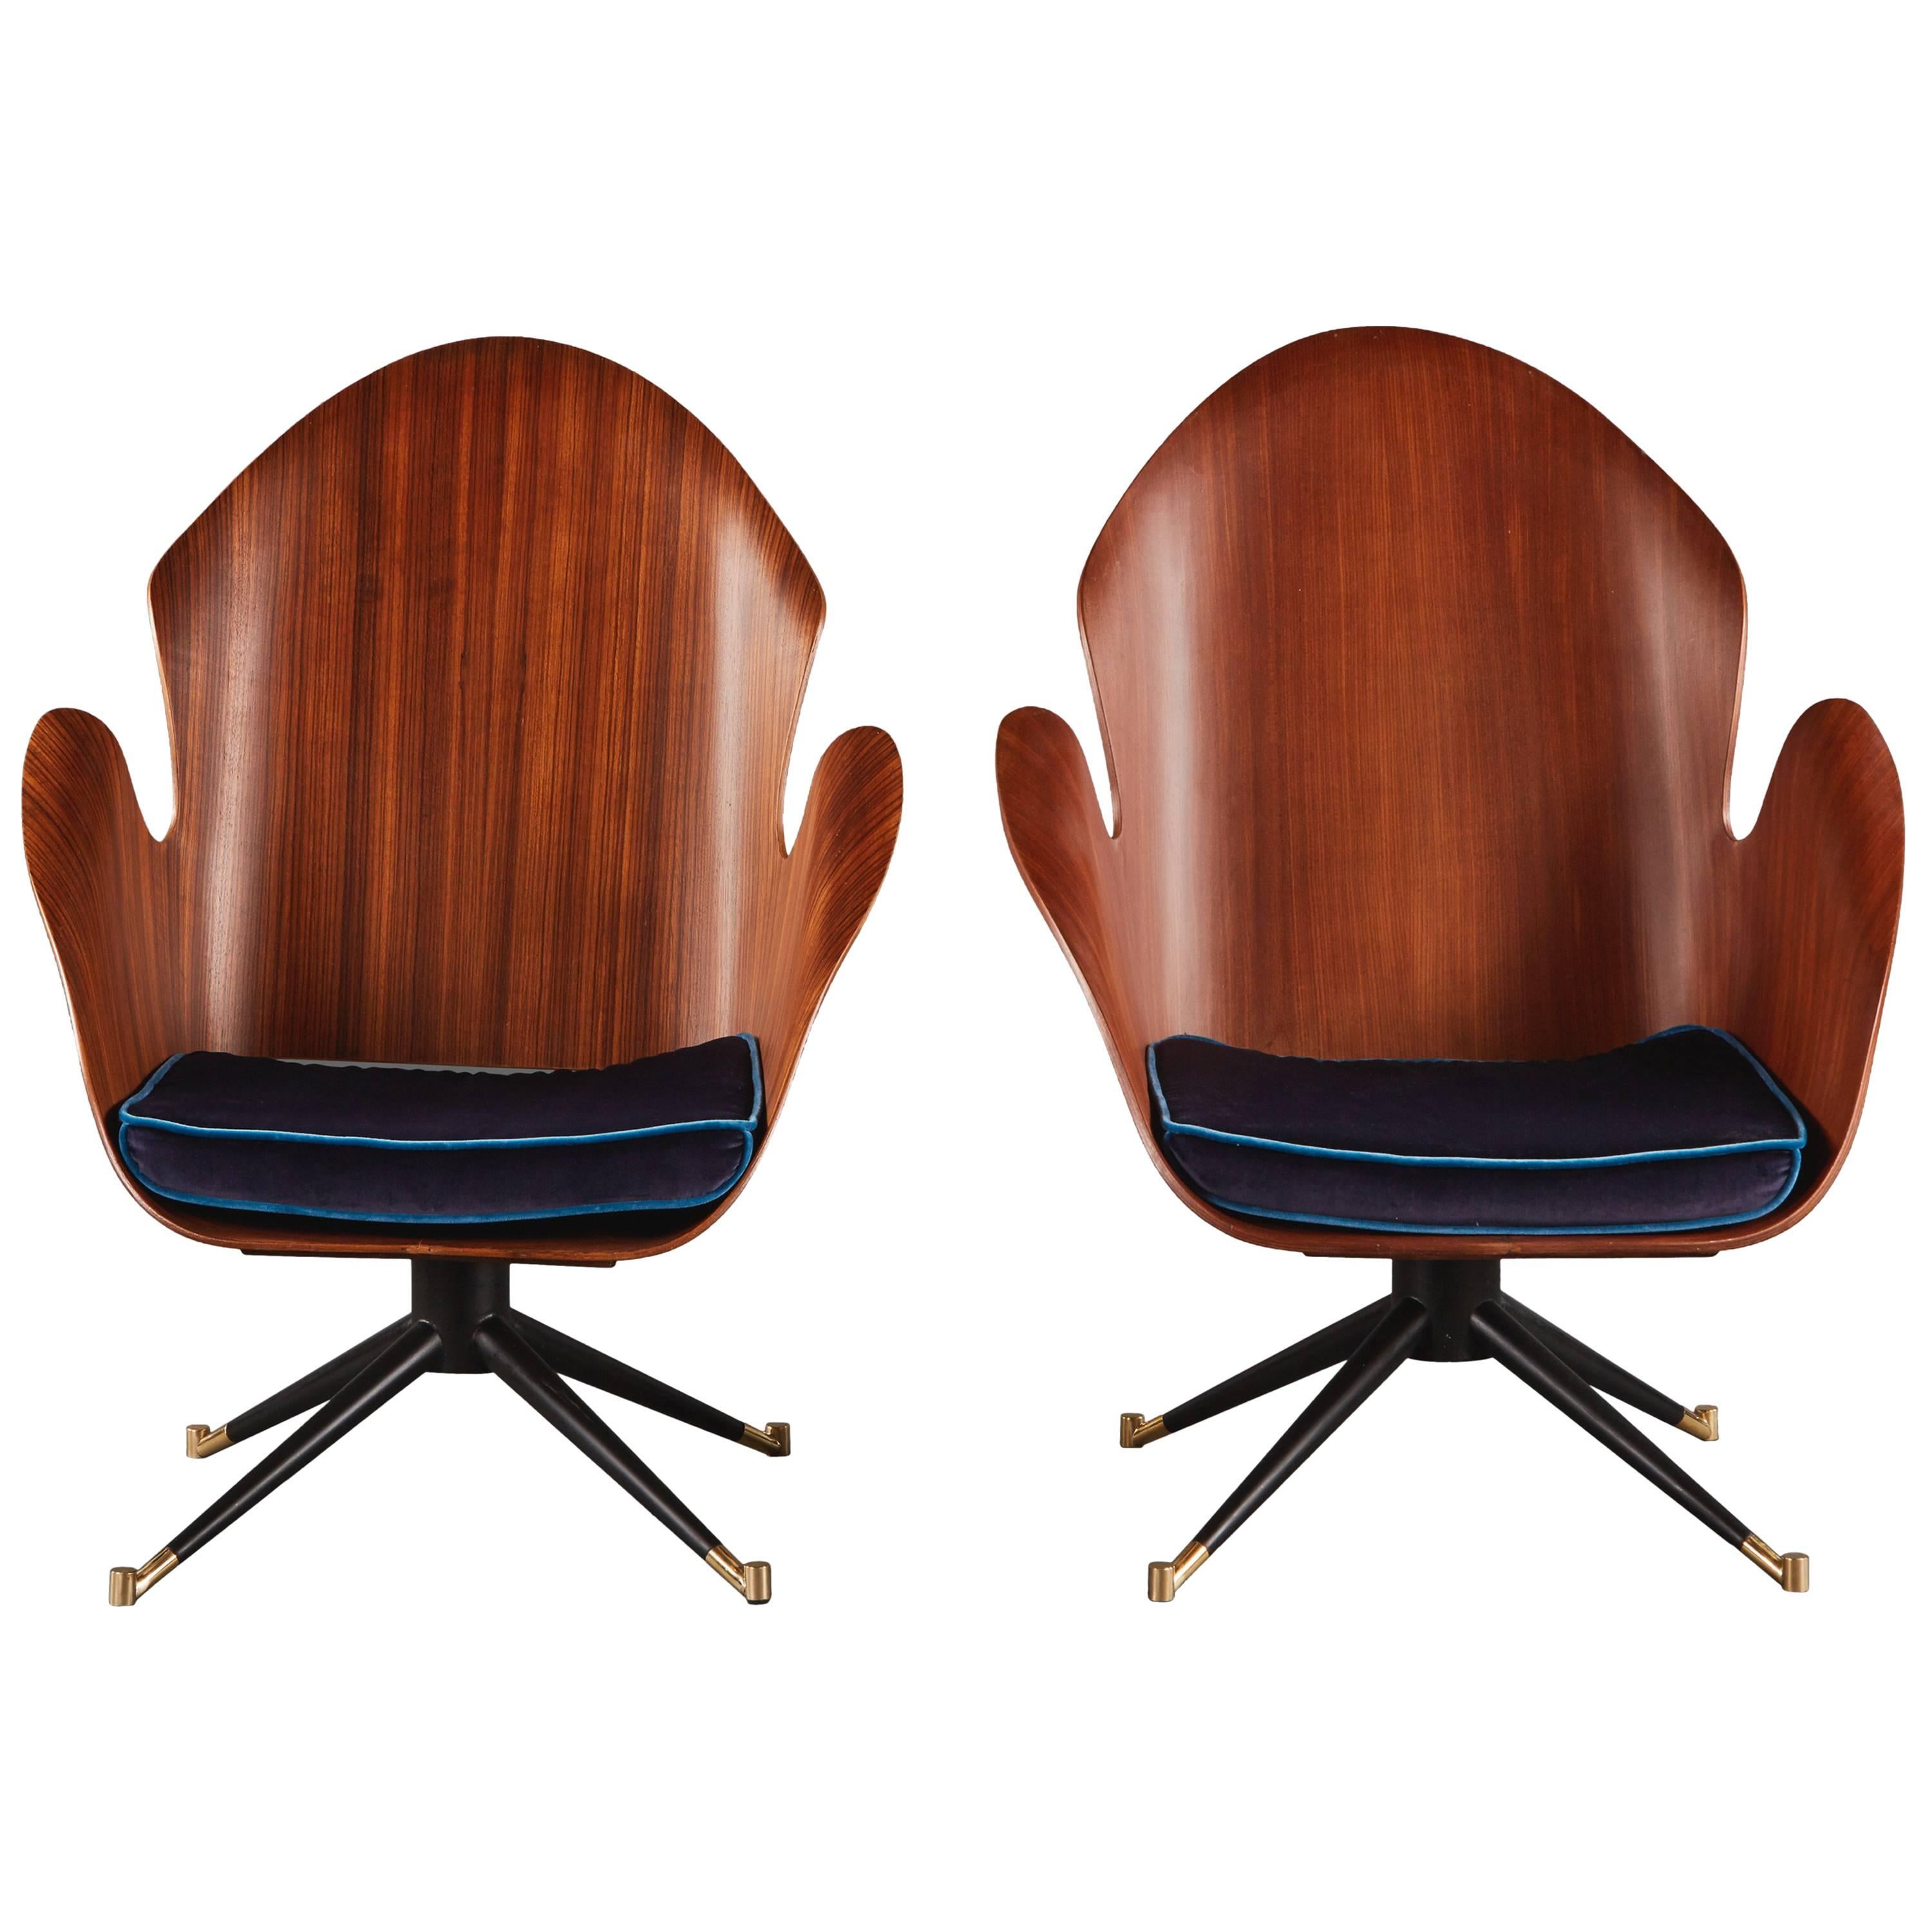 Rare and Sculptural Pair of Mid-Century Italian Swivel Chairs For Sale